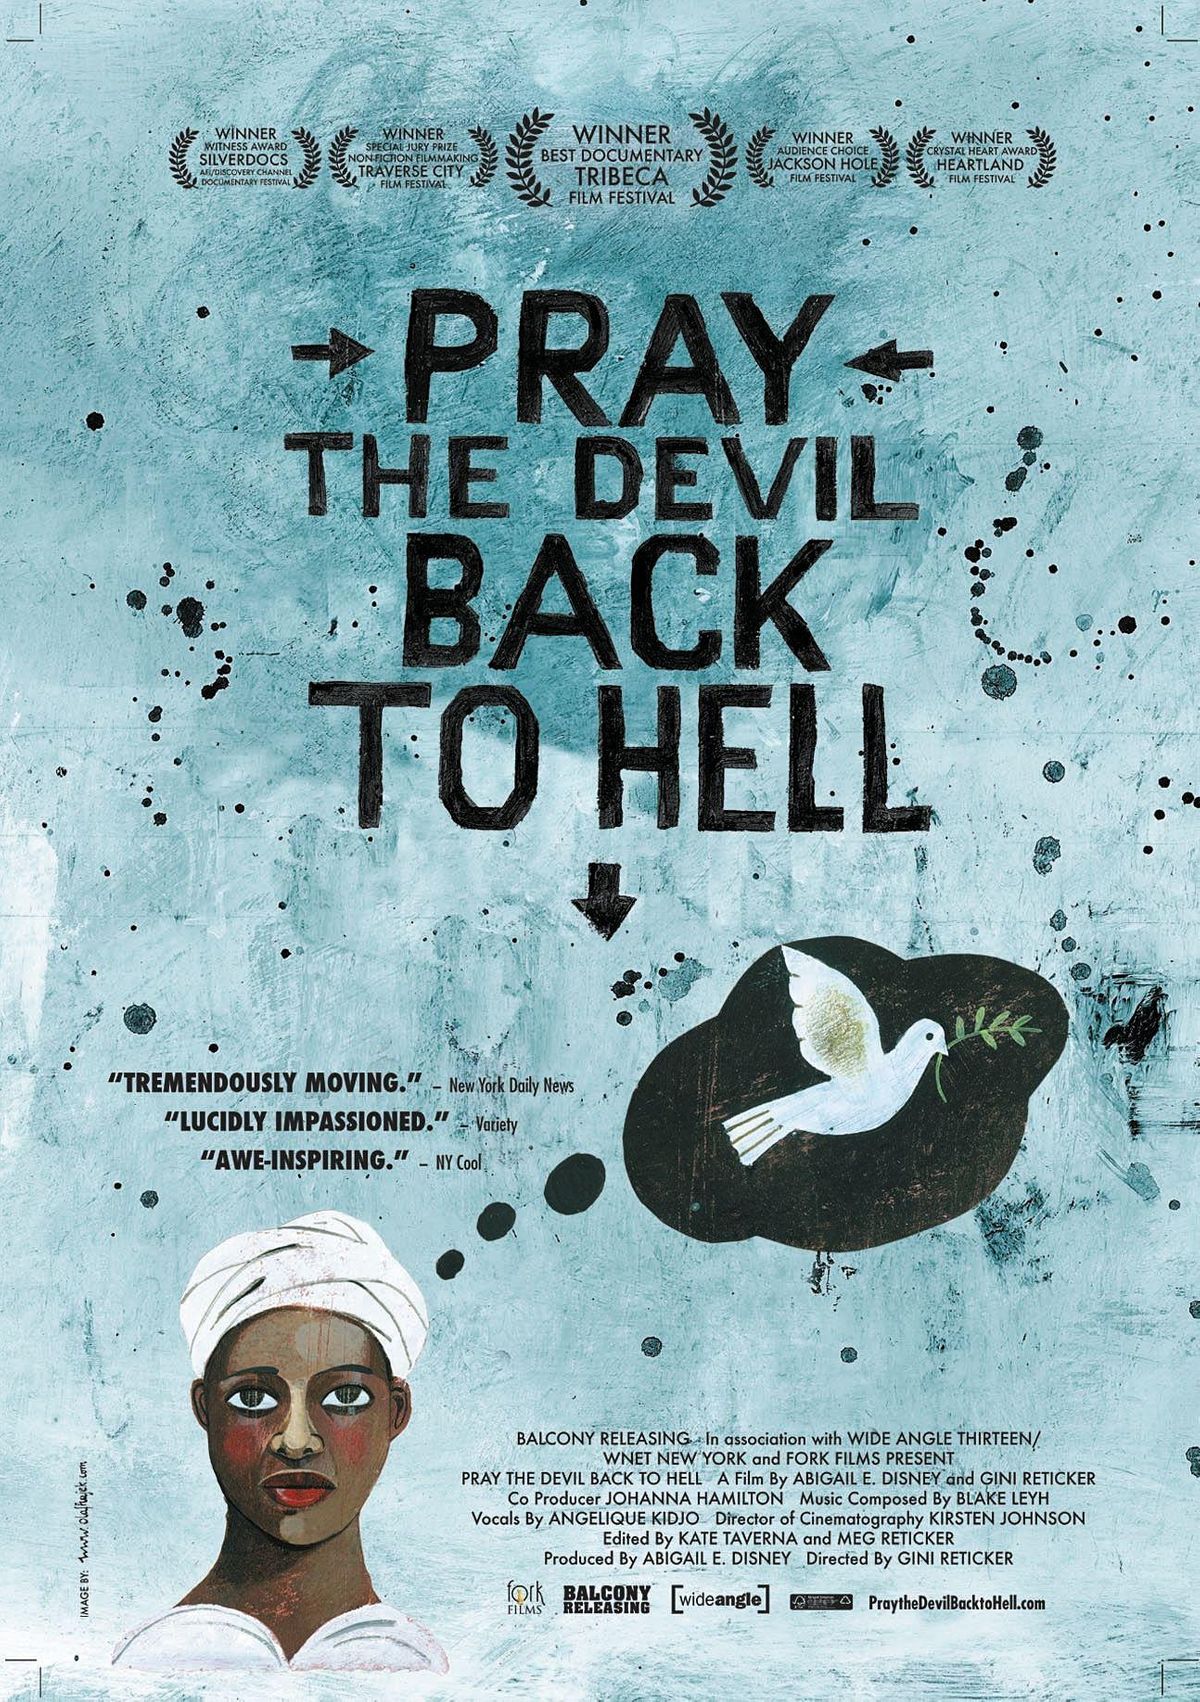 MOVIE NIGHT featuring "Pray the Devil Back to Hell"